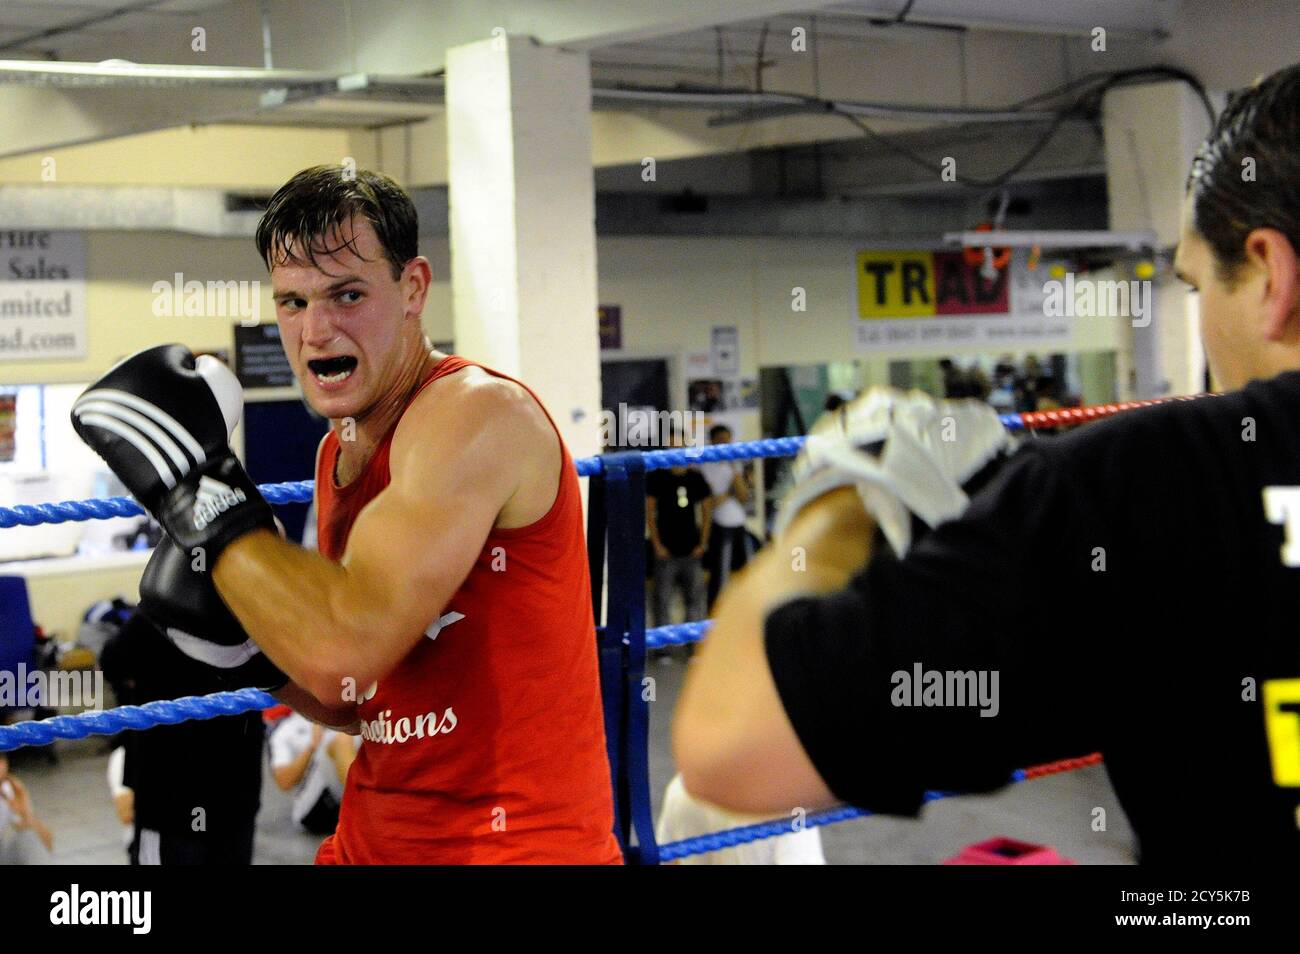 White collar boxers train at the Trad TKO Boxing Gym in London March 28,  2012. Workers in London's financial district known as the "City" are  naturally competitive and having achieved financial success